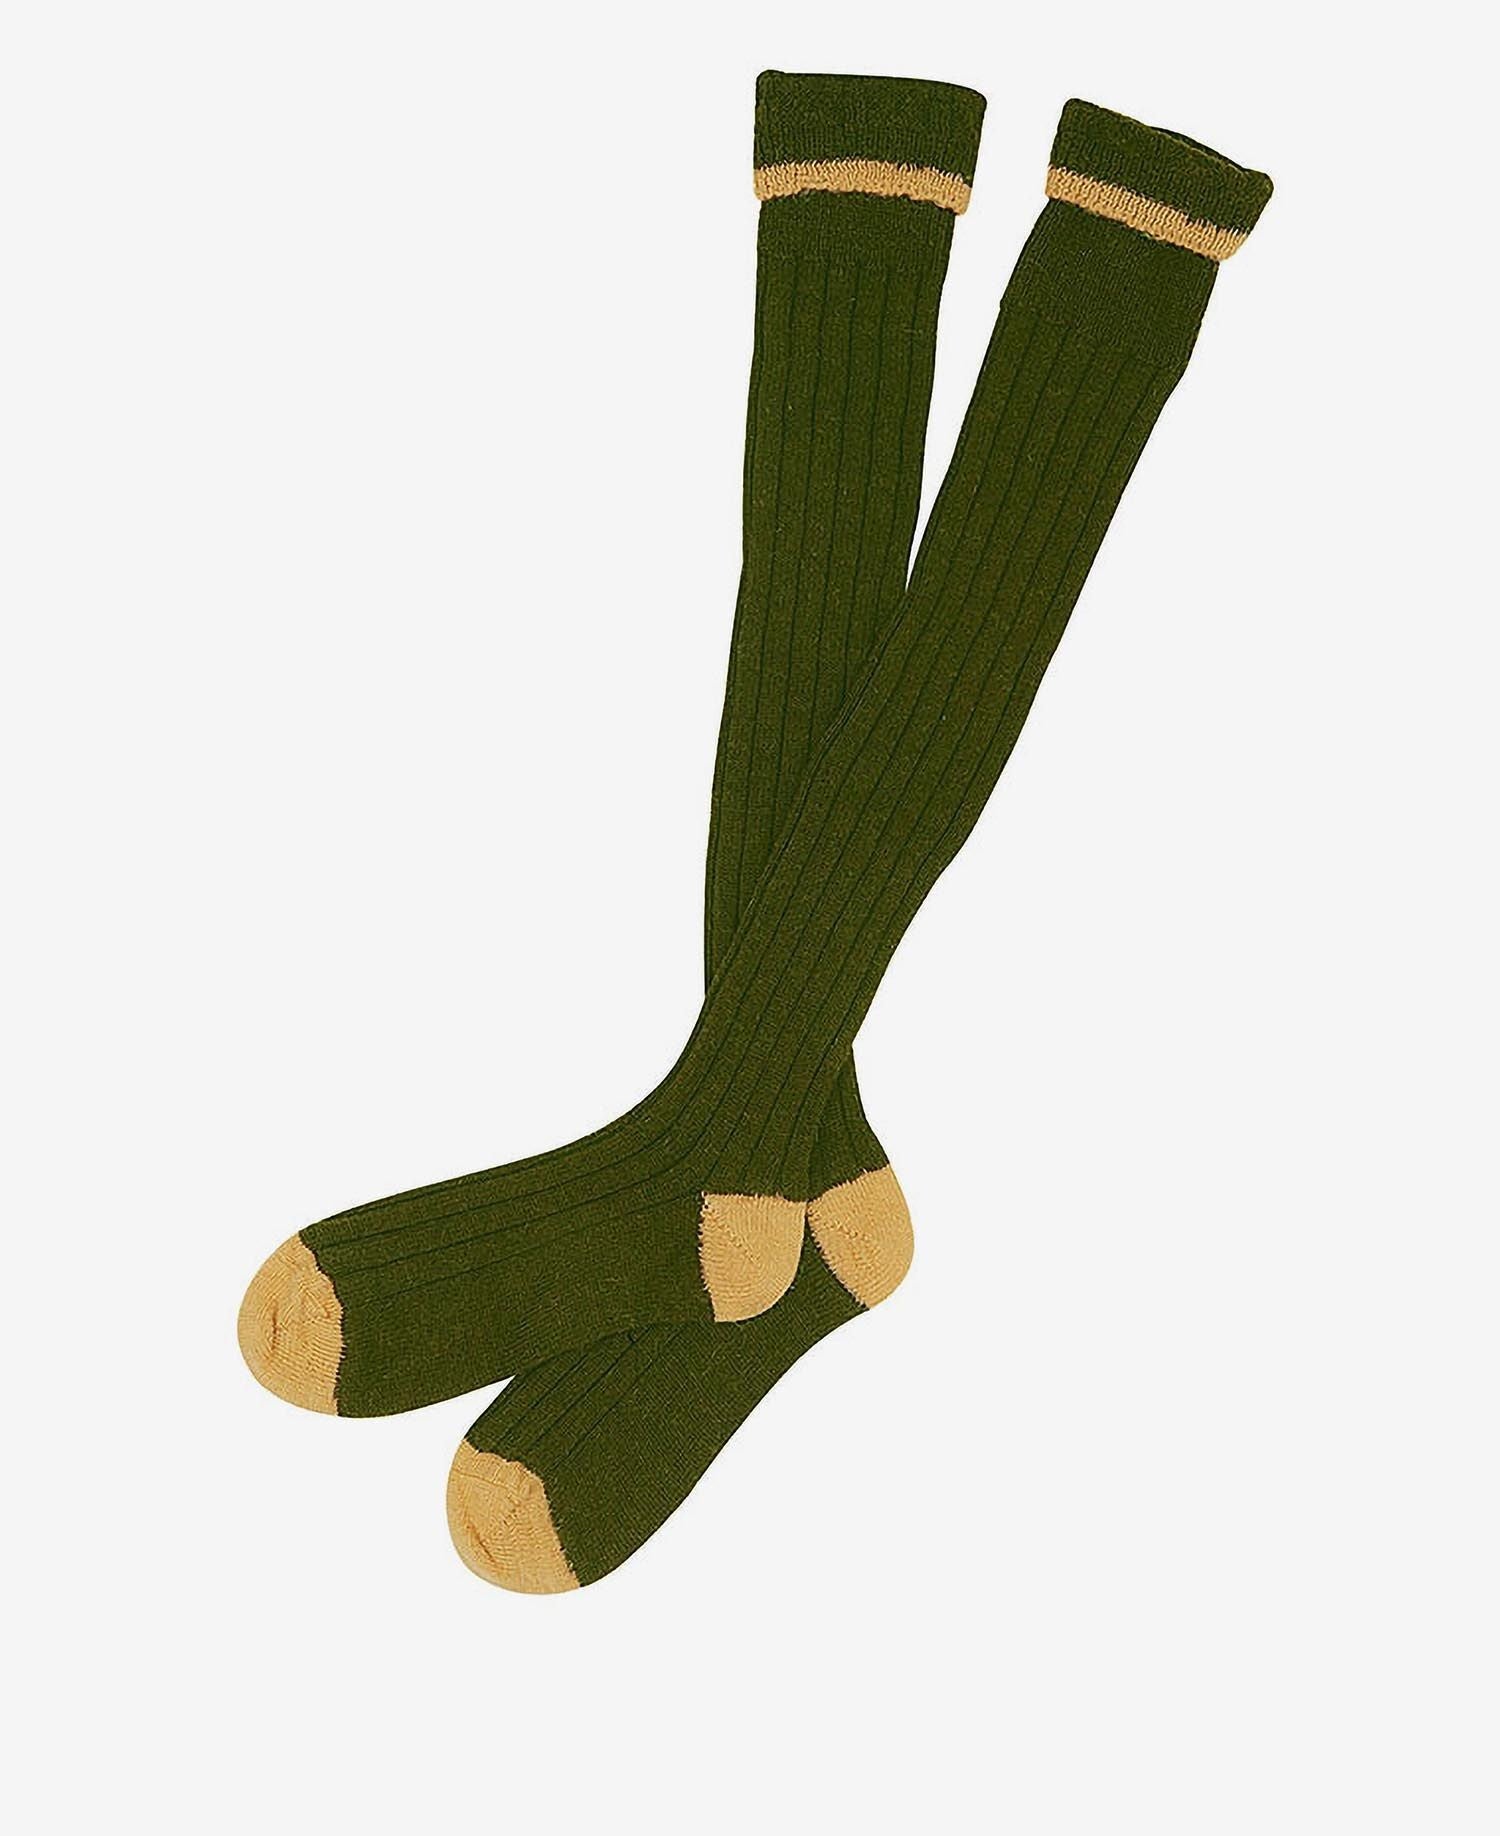 Barbour Olive Gold Contrast Gun Stockings